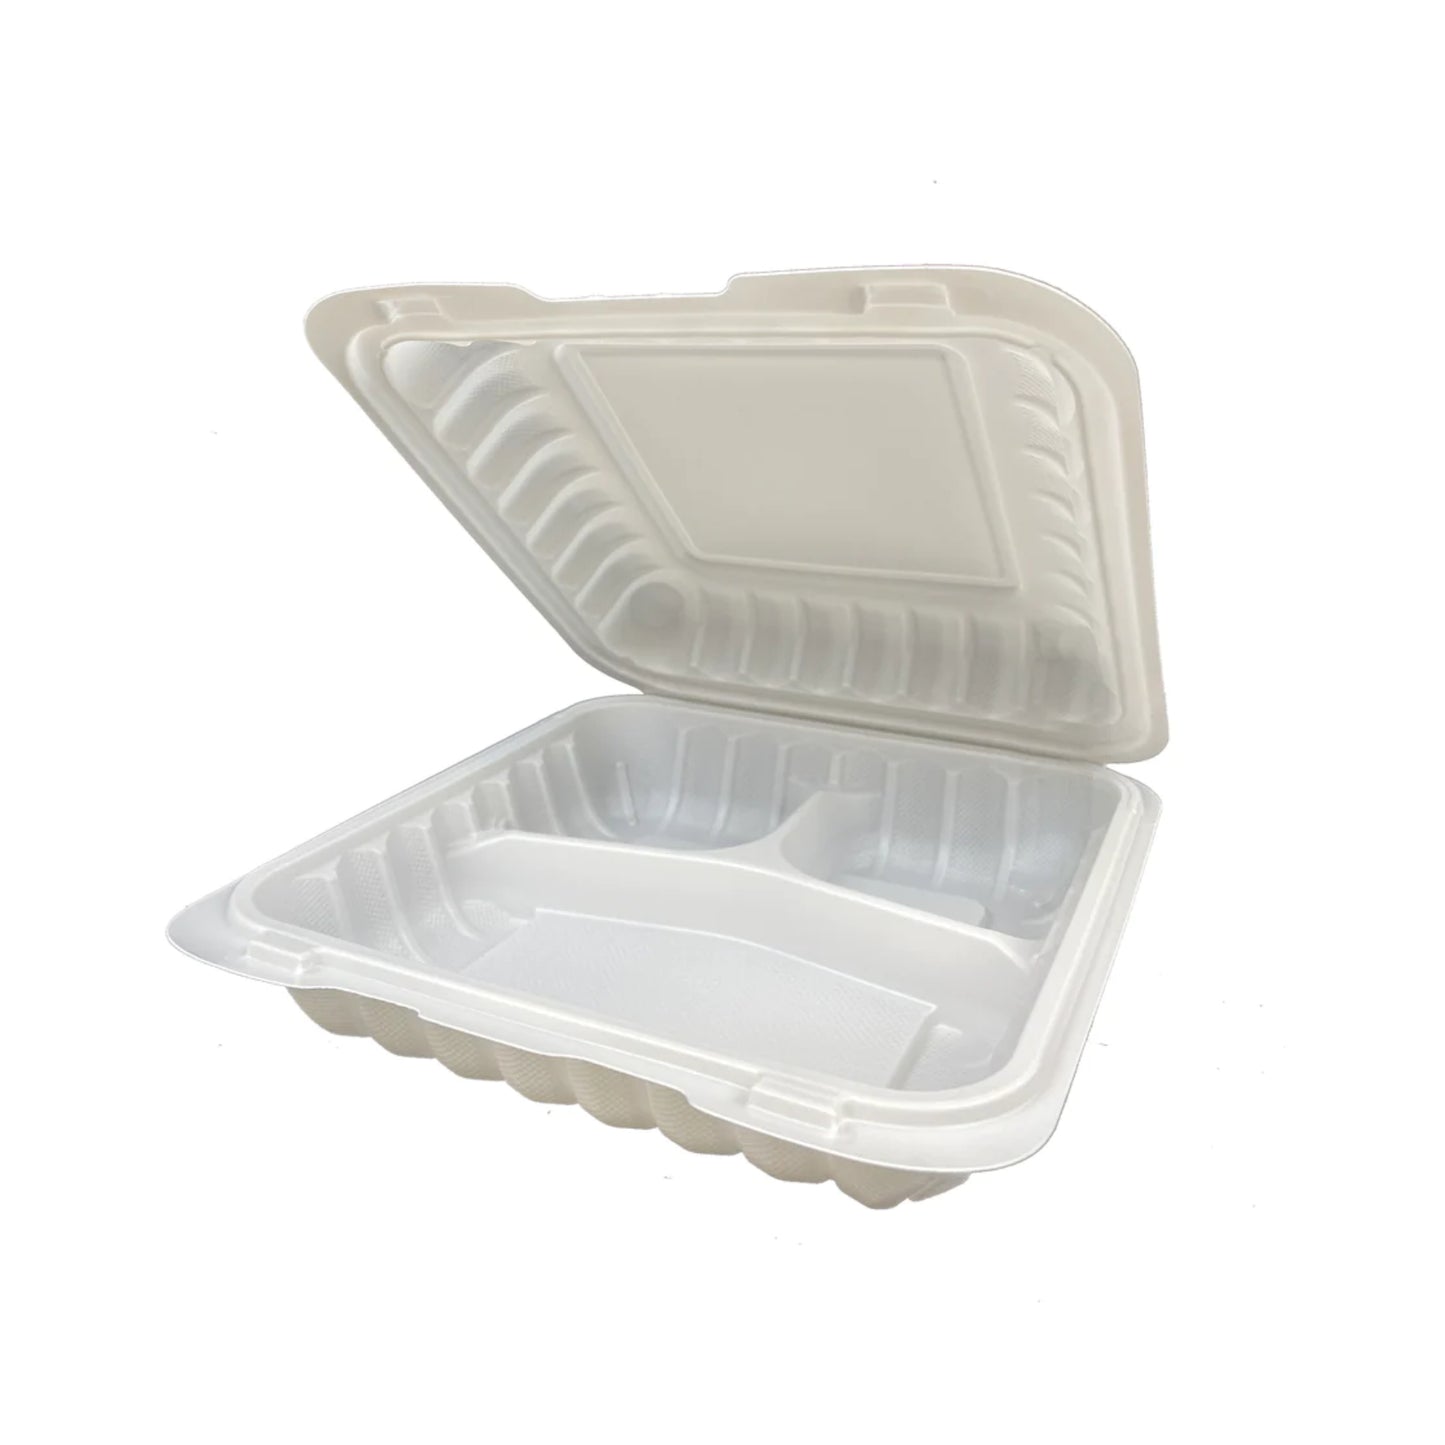 KIS-PP903G | 9x9x3 inches, 3-Compartment, PP Clamshell Food Container; $0.289/pc